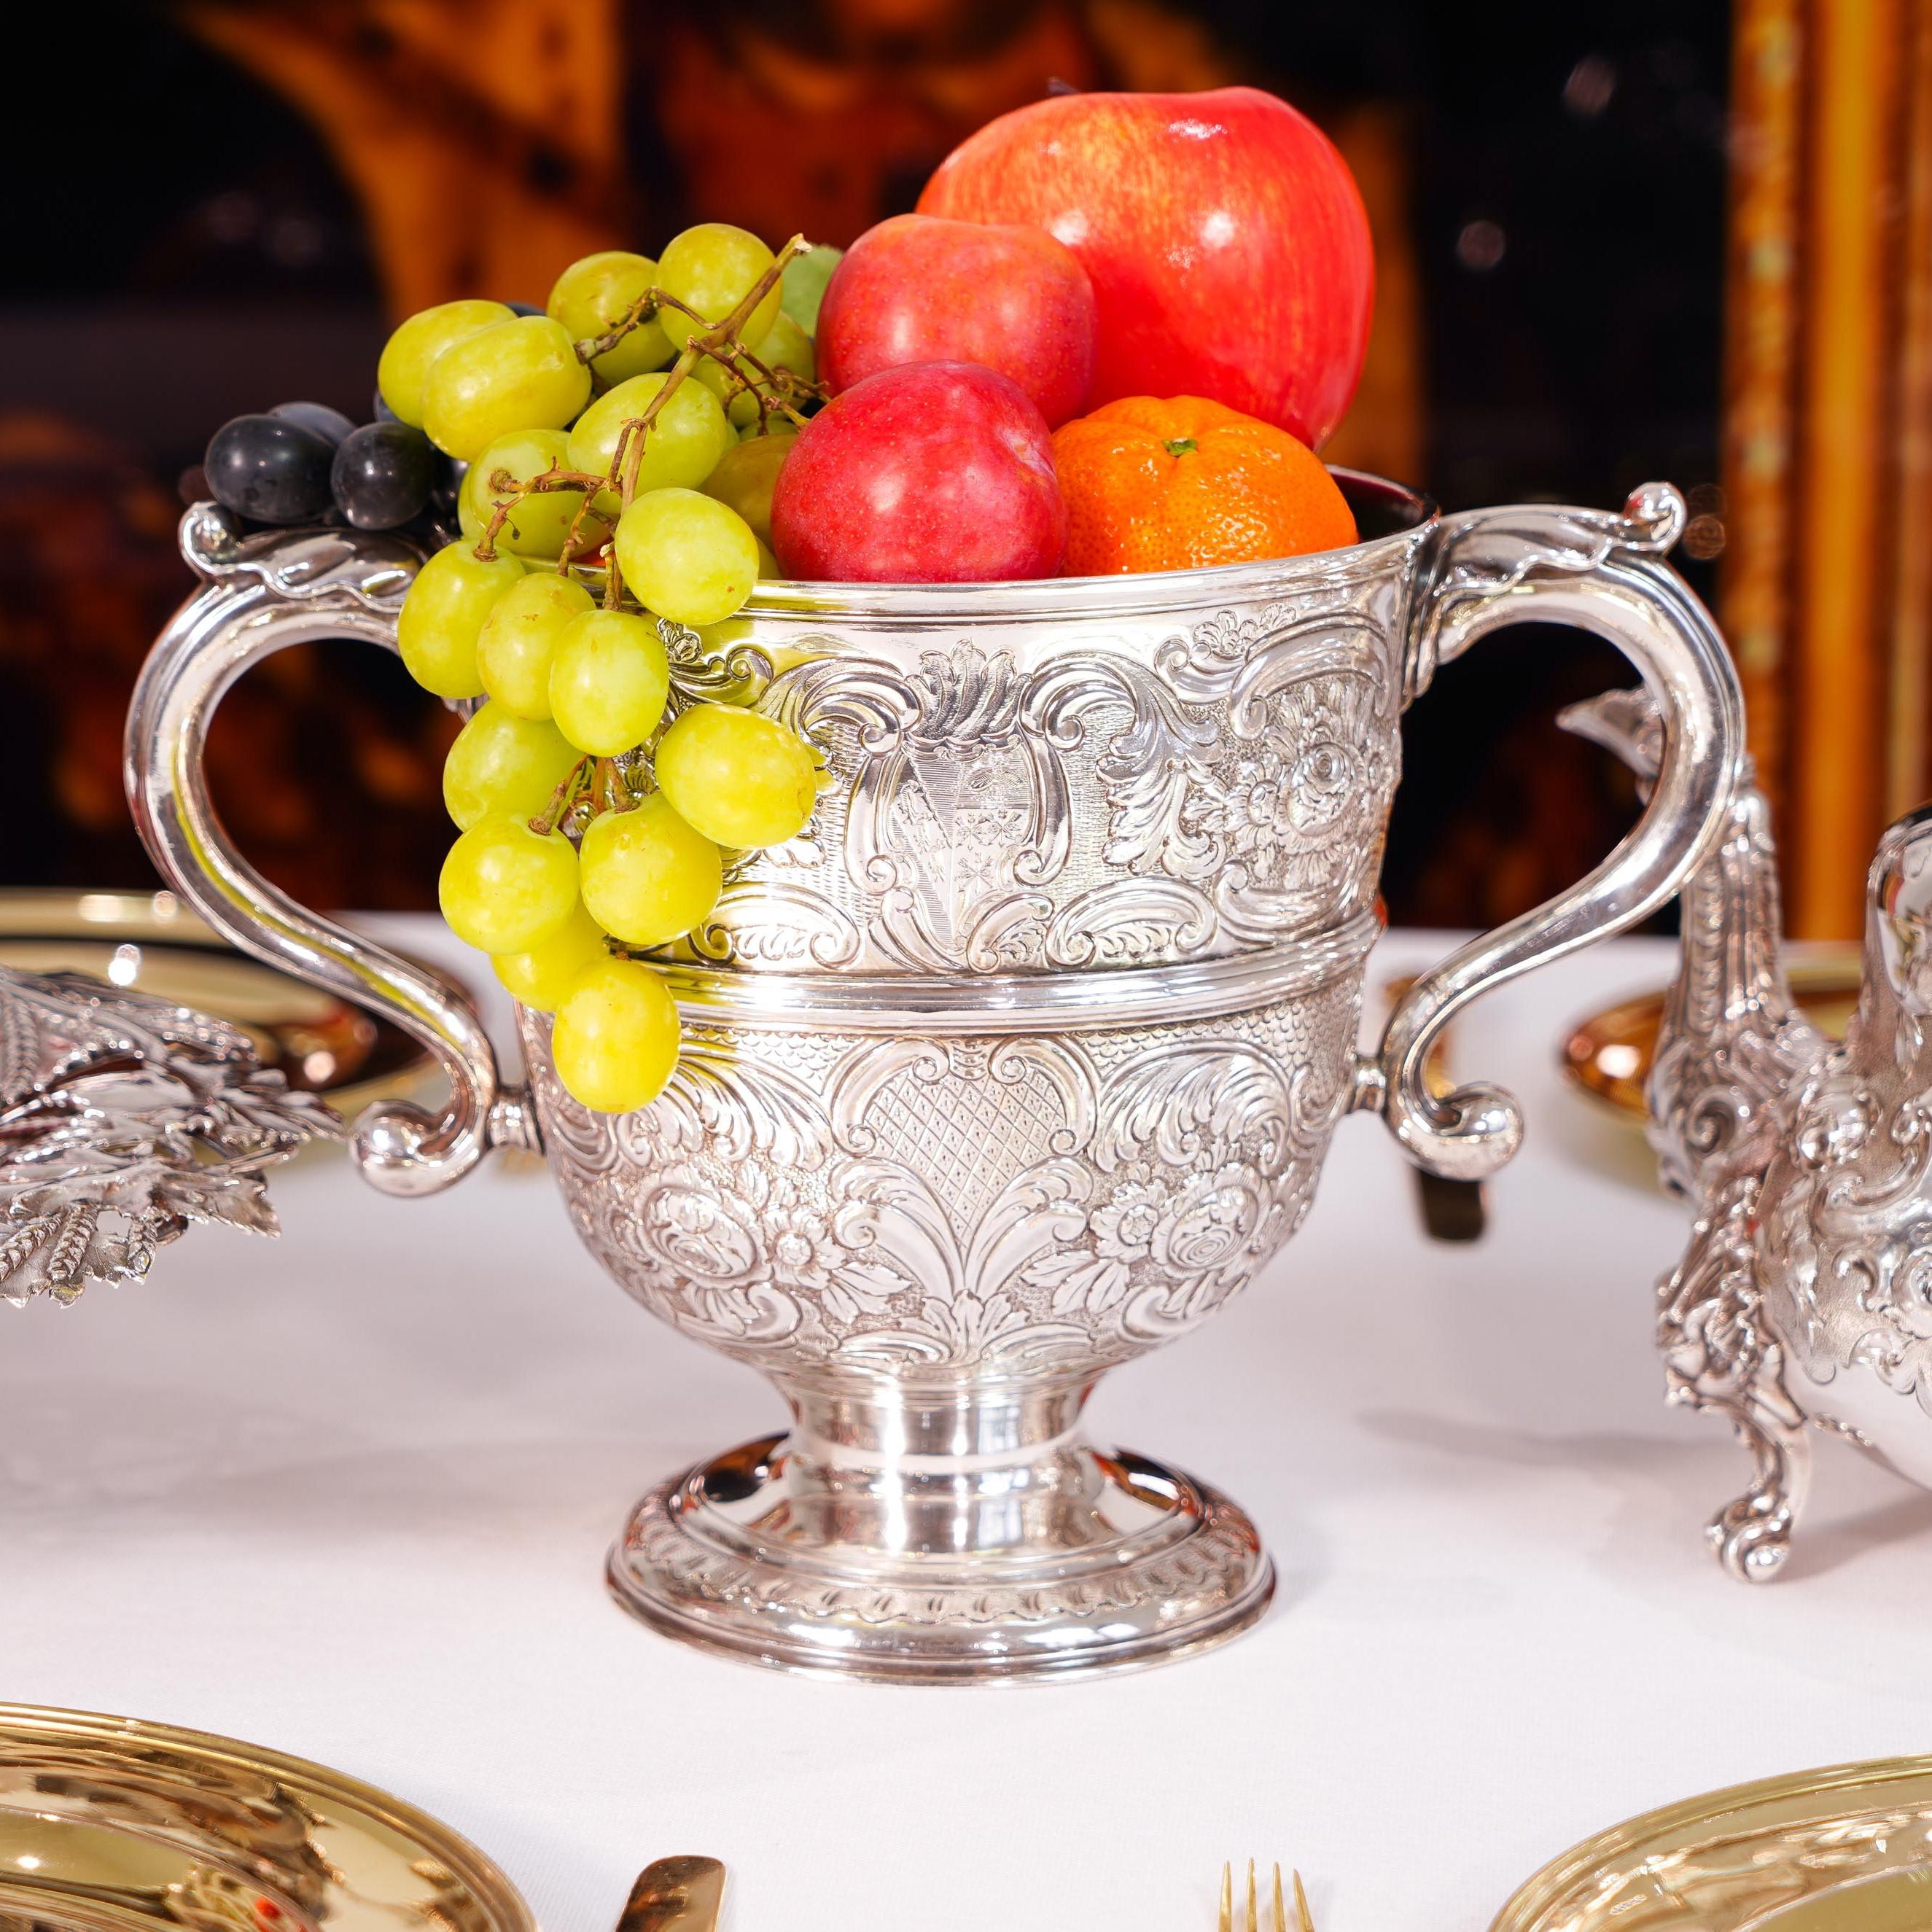 We are delighted to offer this wonderful George I Irish solid silver cup/wine cooler made in Dublin, 1726.

This cup is magnificently decorated and is usually large in size and weight, making for an excellent display centrepiece as part of